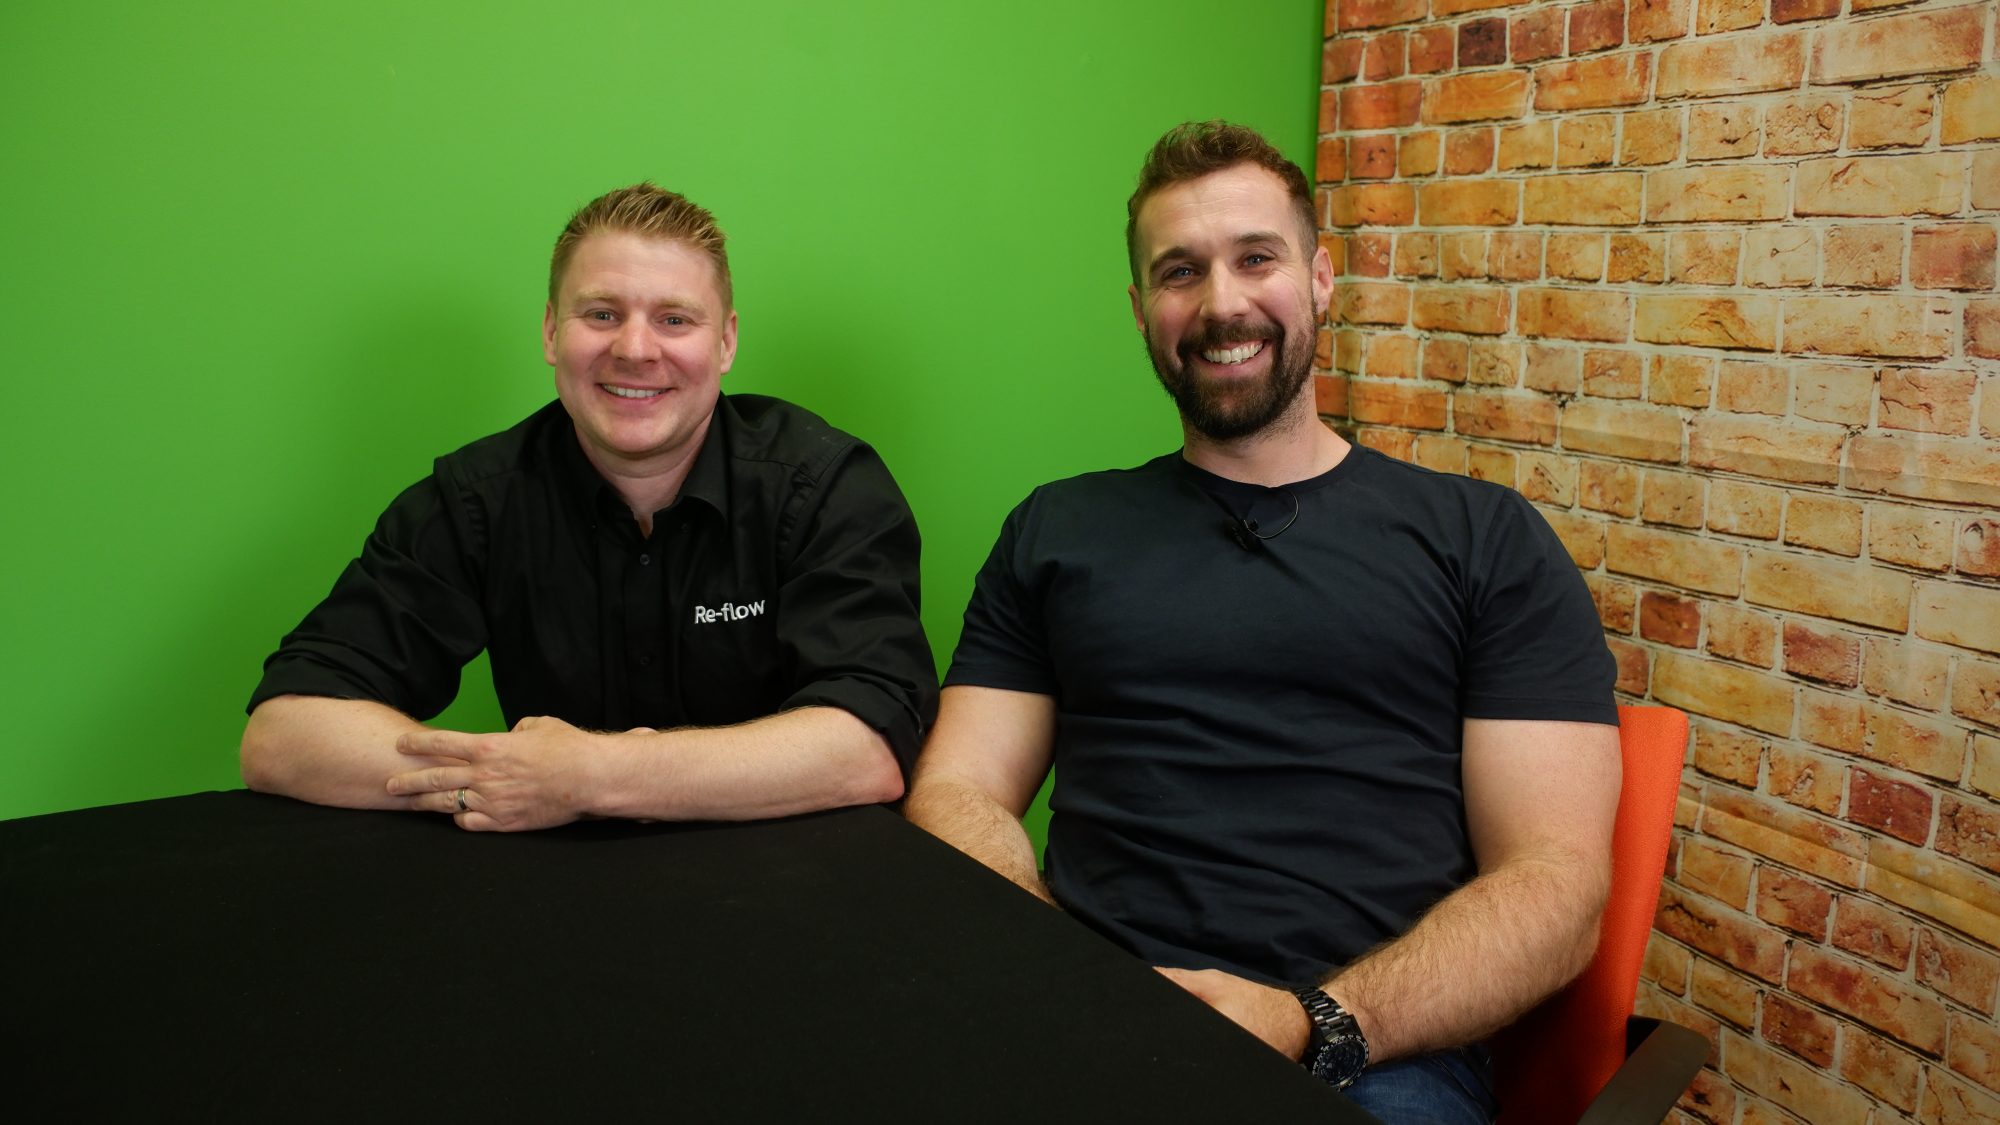 Ashley Wing, Head of Sales & Marketing caught up with Matt behind the scenes of the podcast.